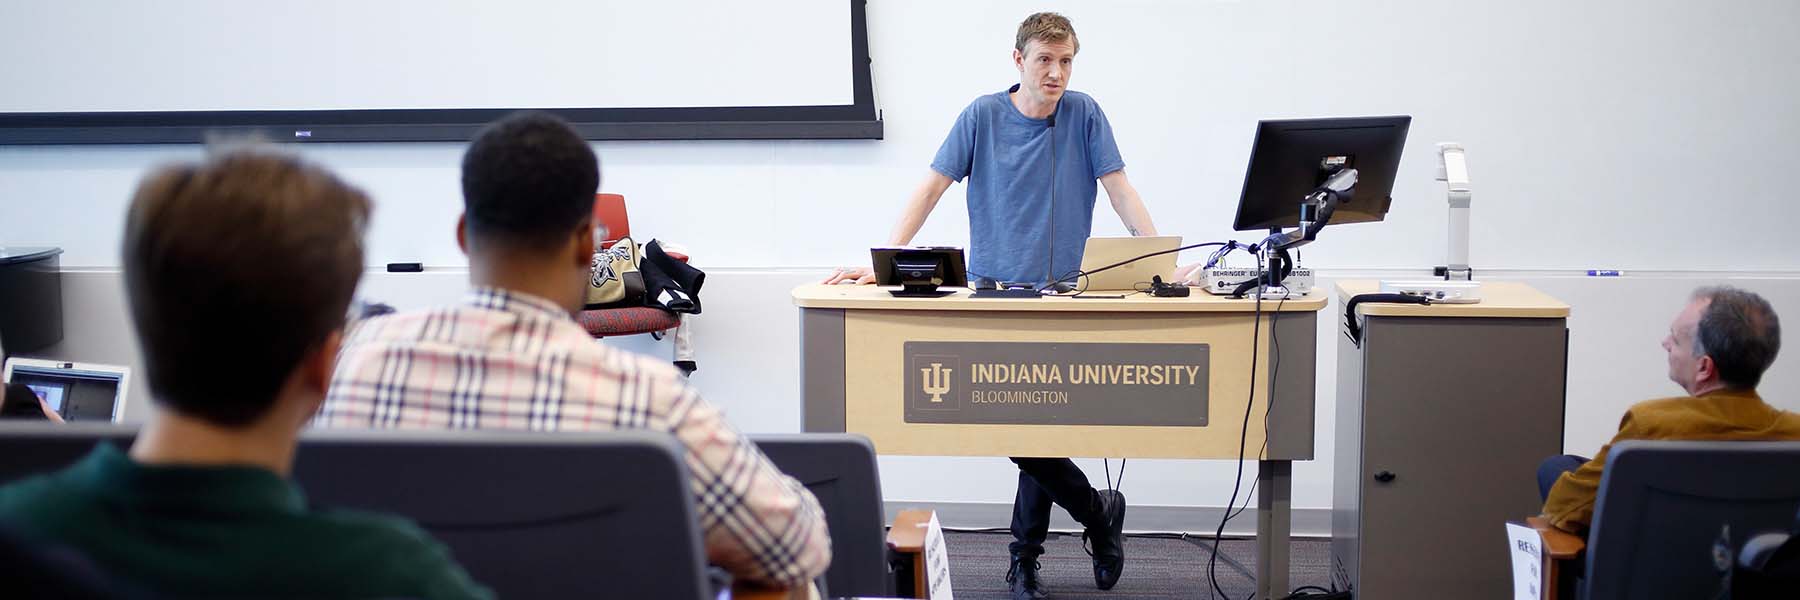 Professionals look toward IU alumnus Ian Rogers at the front of a lecture hall.